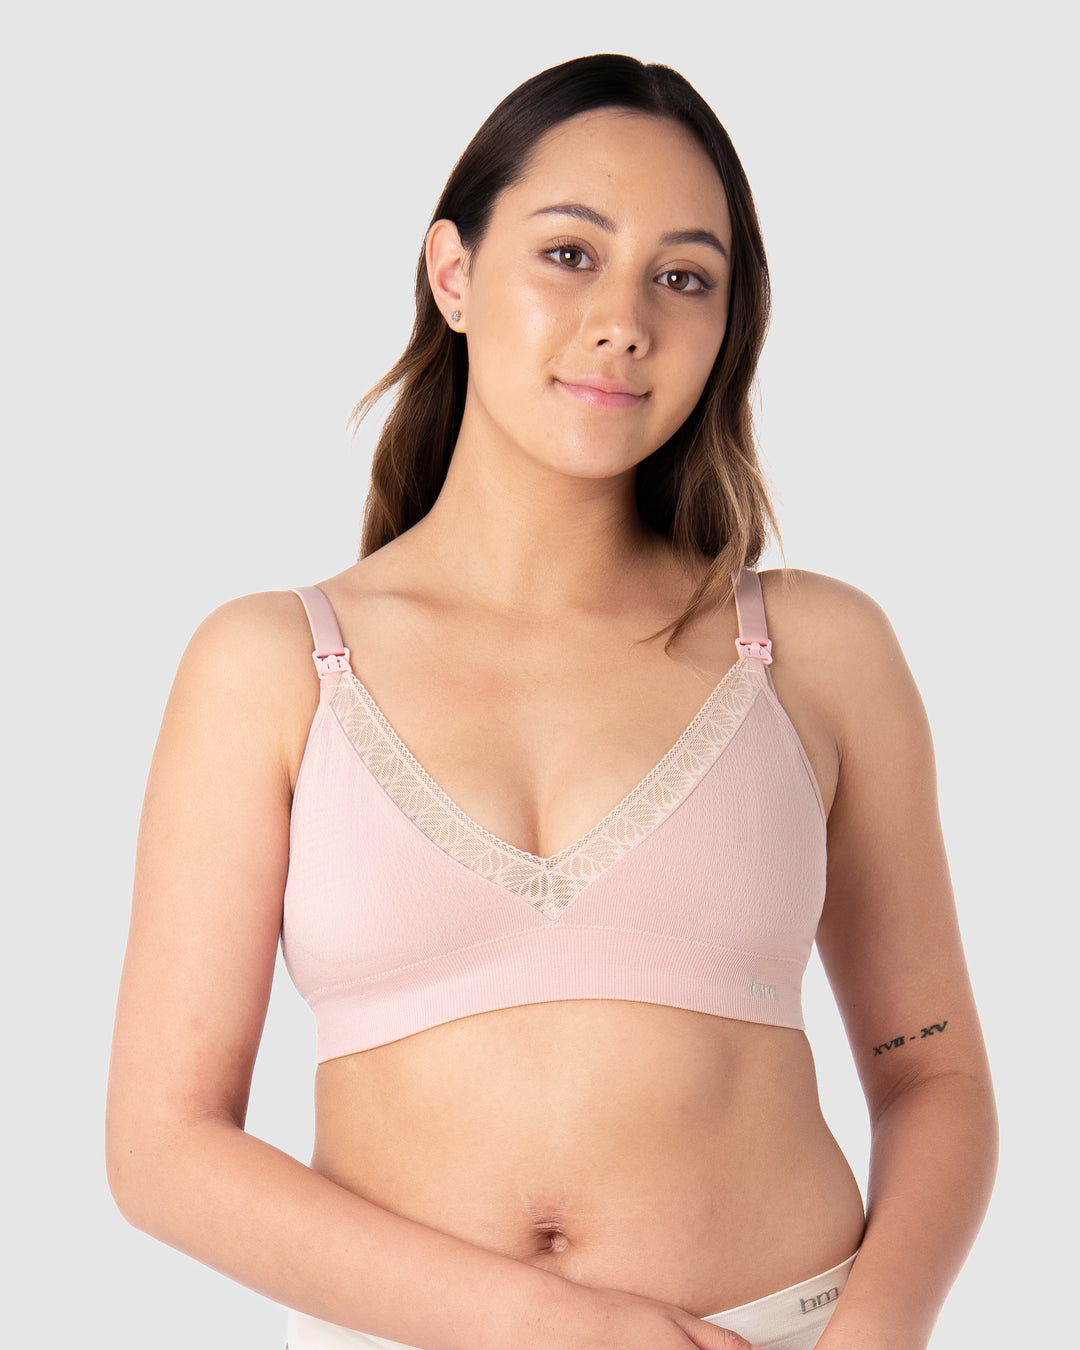 Comfortable, supportive and WIRE FREE! 💗⁠ ⁠ #bamboobra #wirefreebra  #wirefree #bamboo #bra #womenswear #musthavebra #undergarments